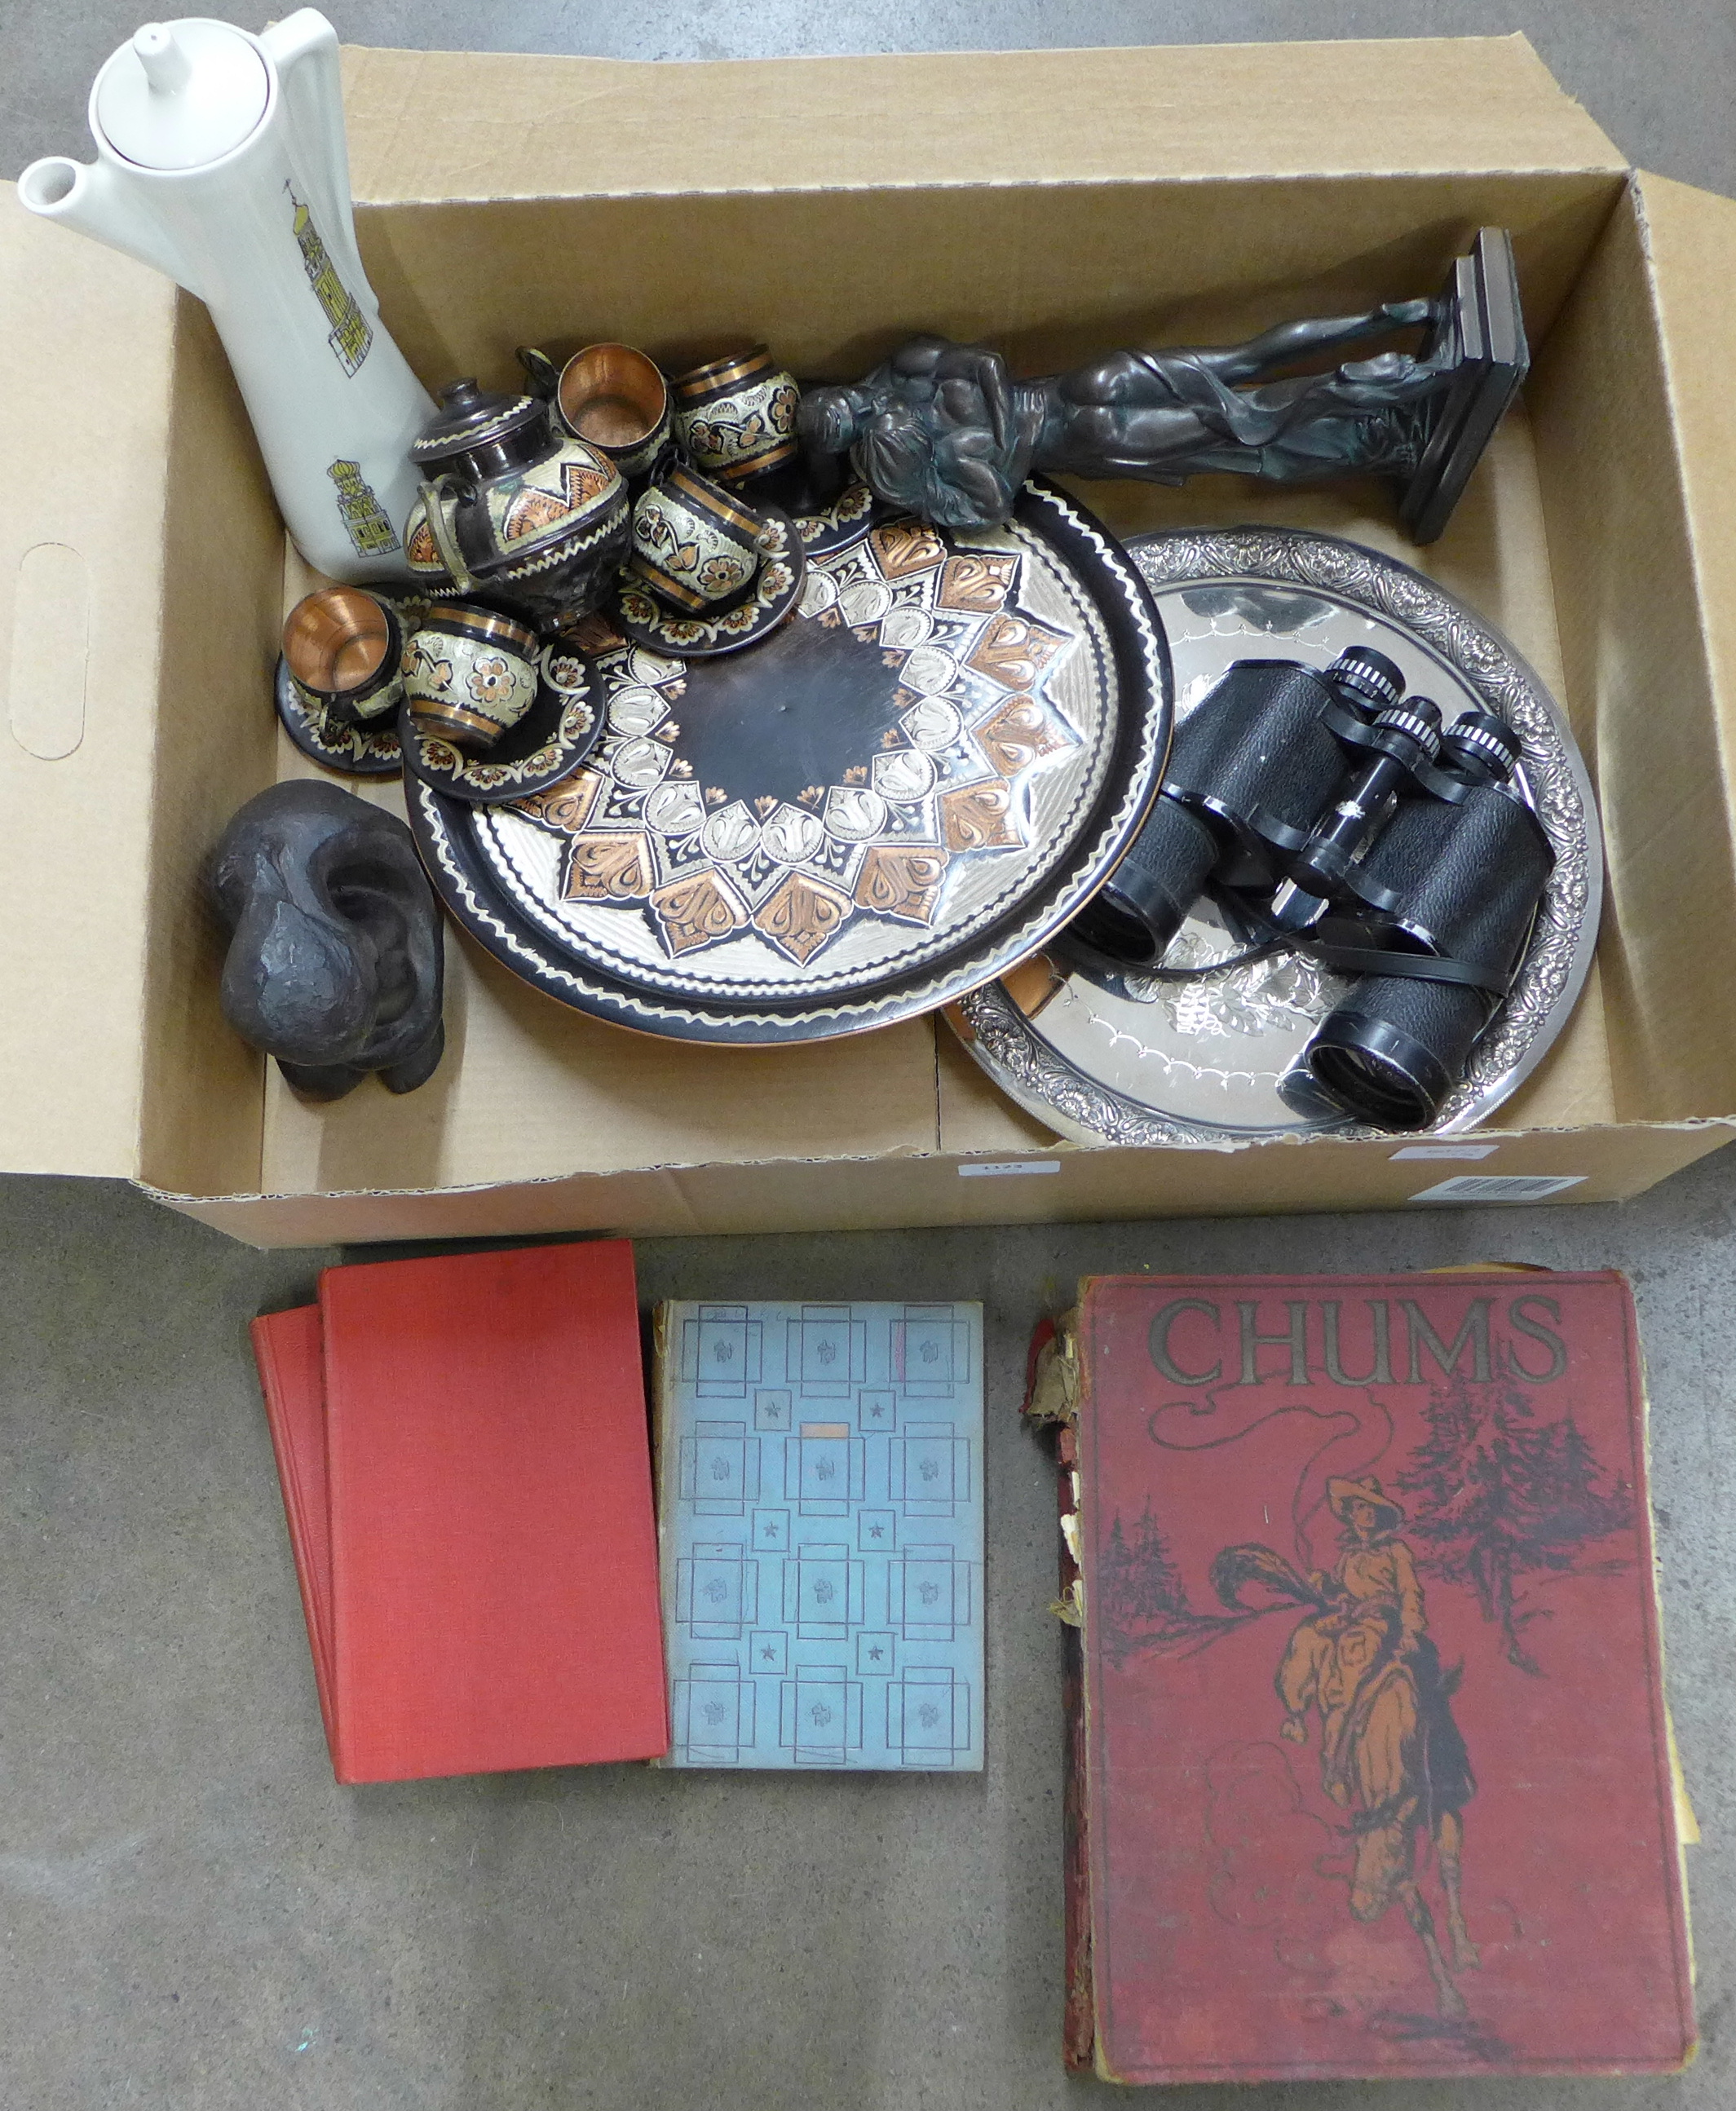 Two studio figures, an Eastern coffee service and tray, a pair of 16x50 binoculars, a coffee pot,